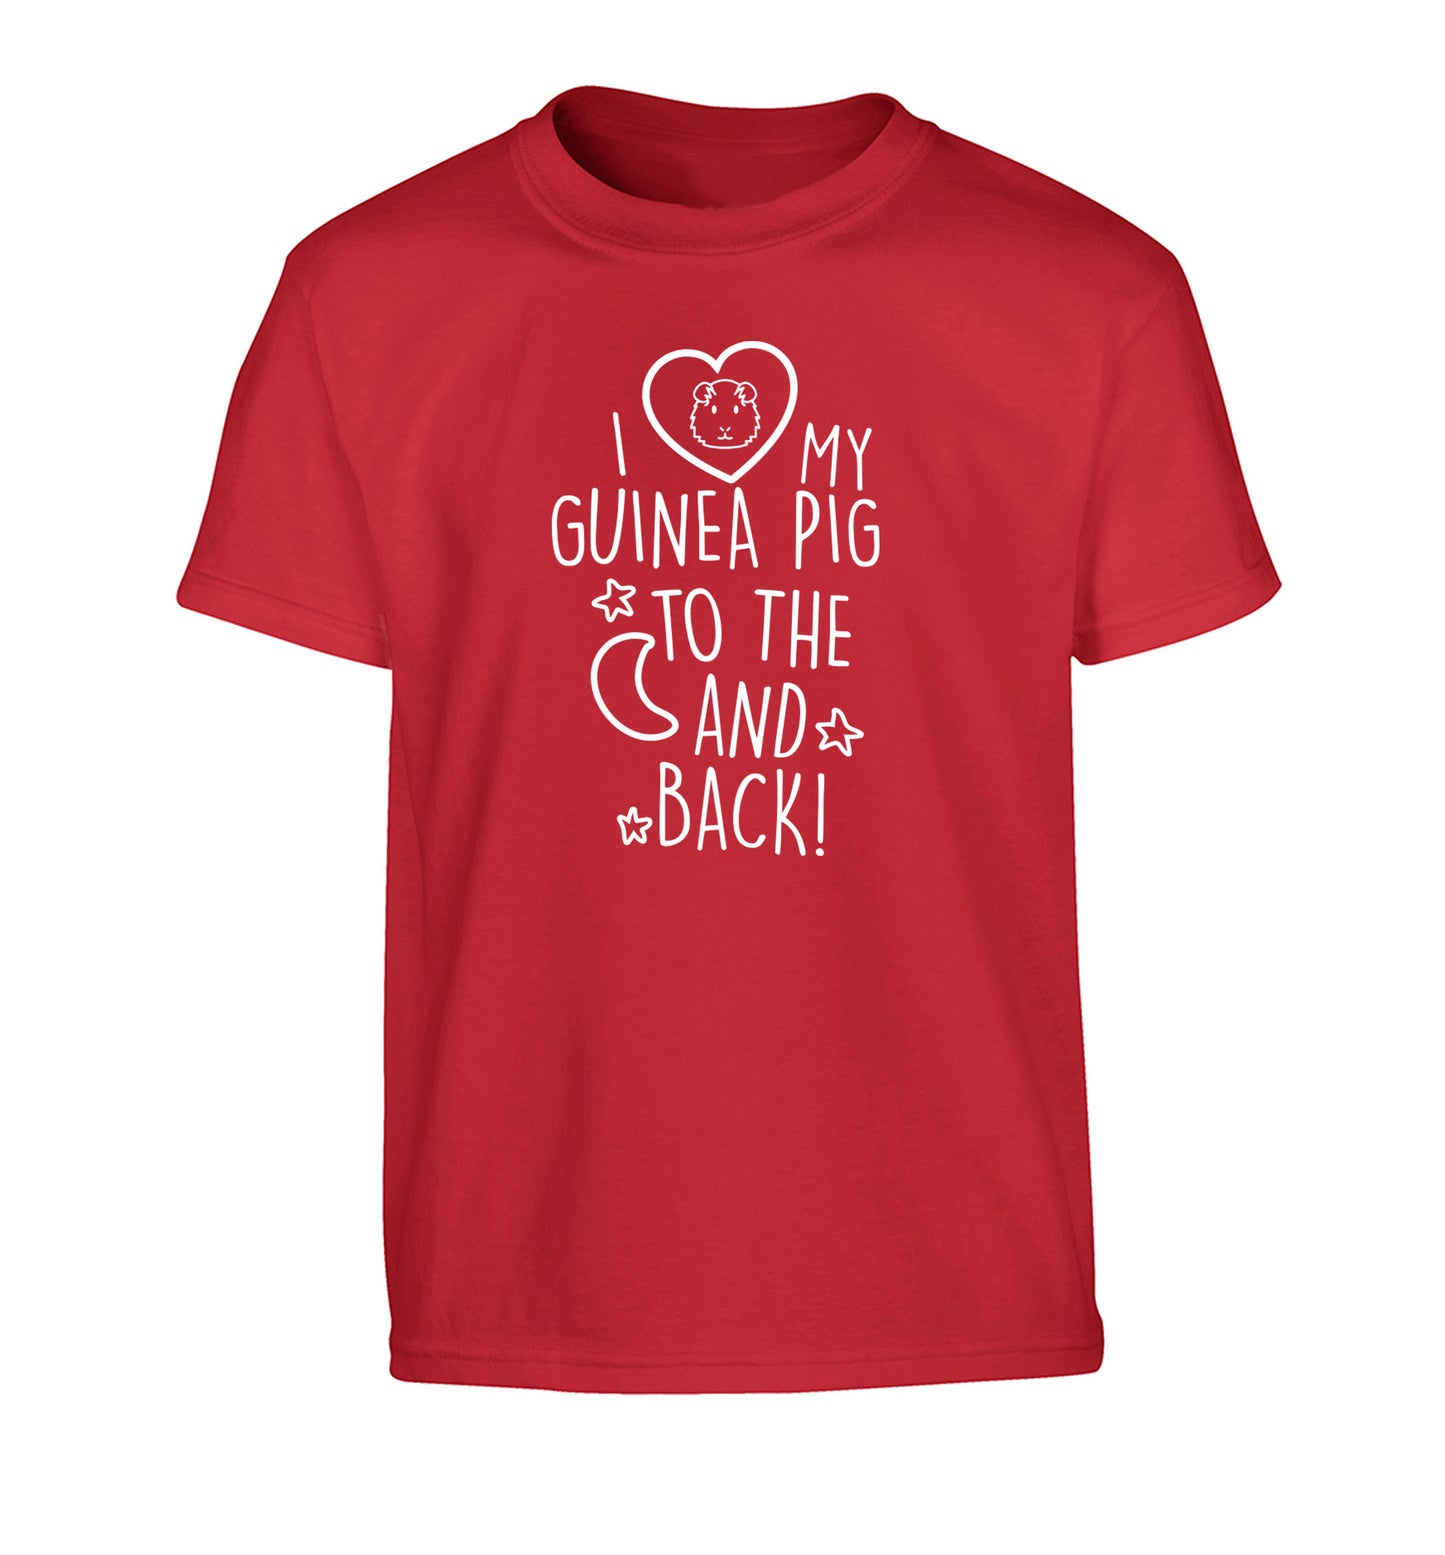 I love my guinea pig to the moon and back Children's red Tshirt 12-14 Years